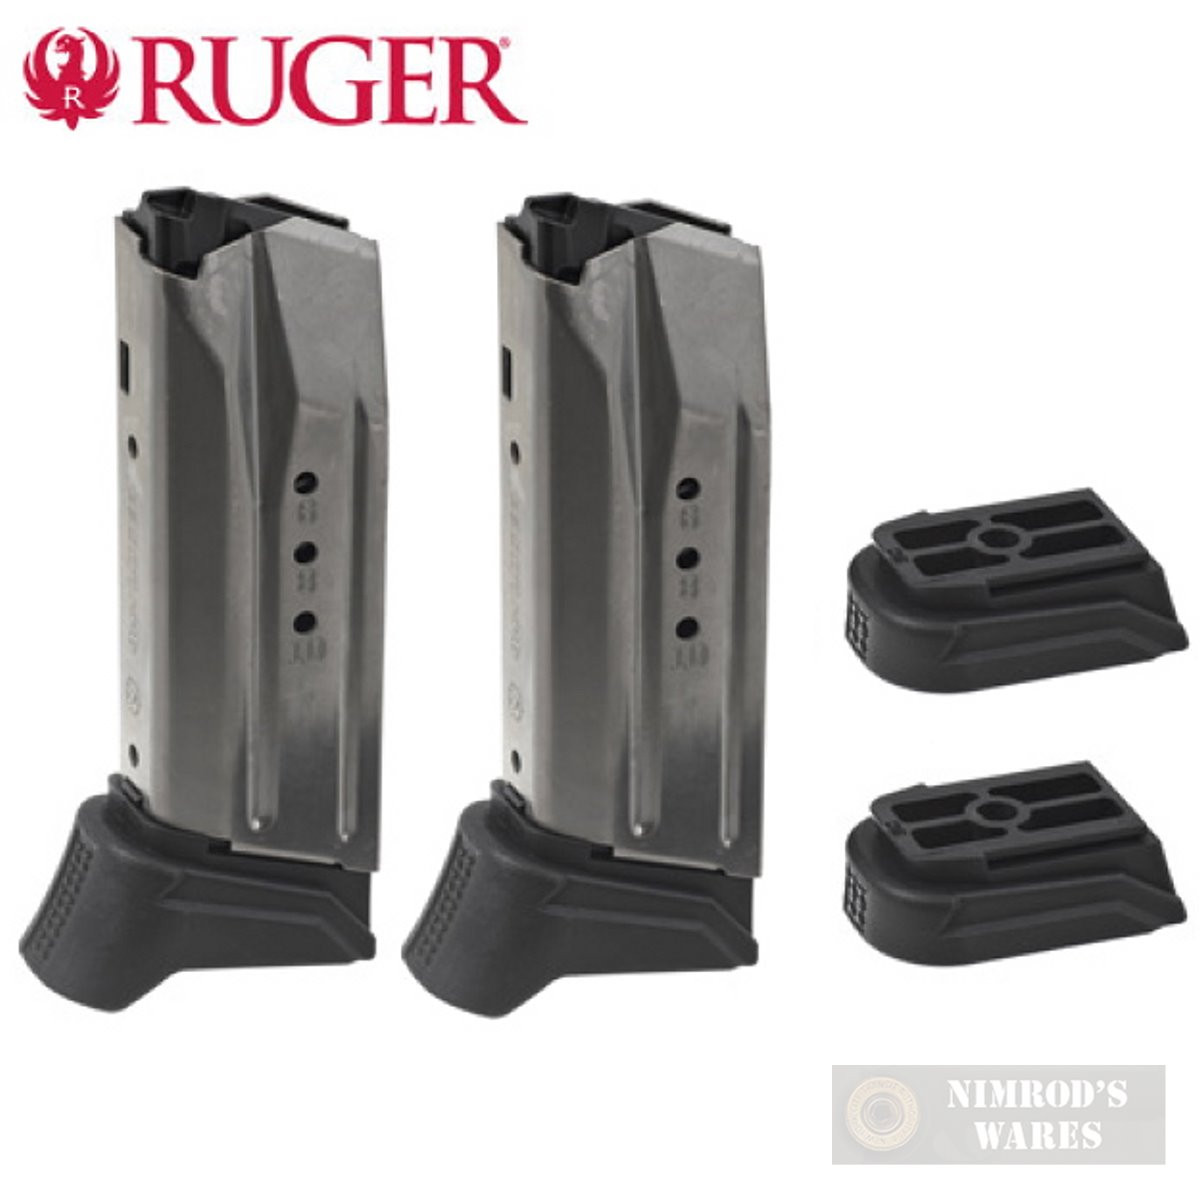 Ruger American Compact Pistol 9mm 10-Round Magazine  90617 Factory